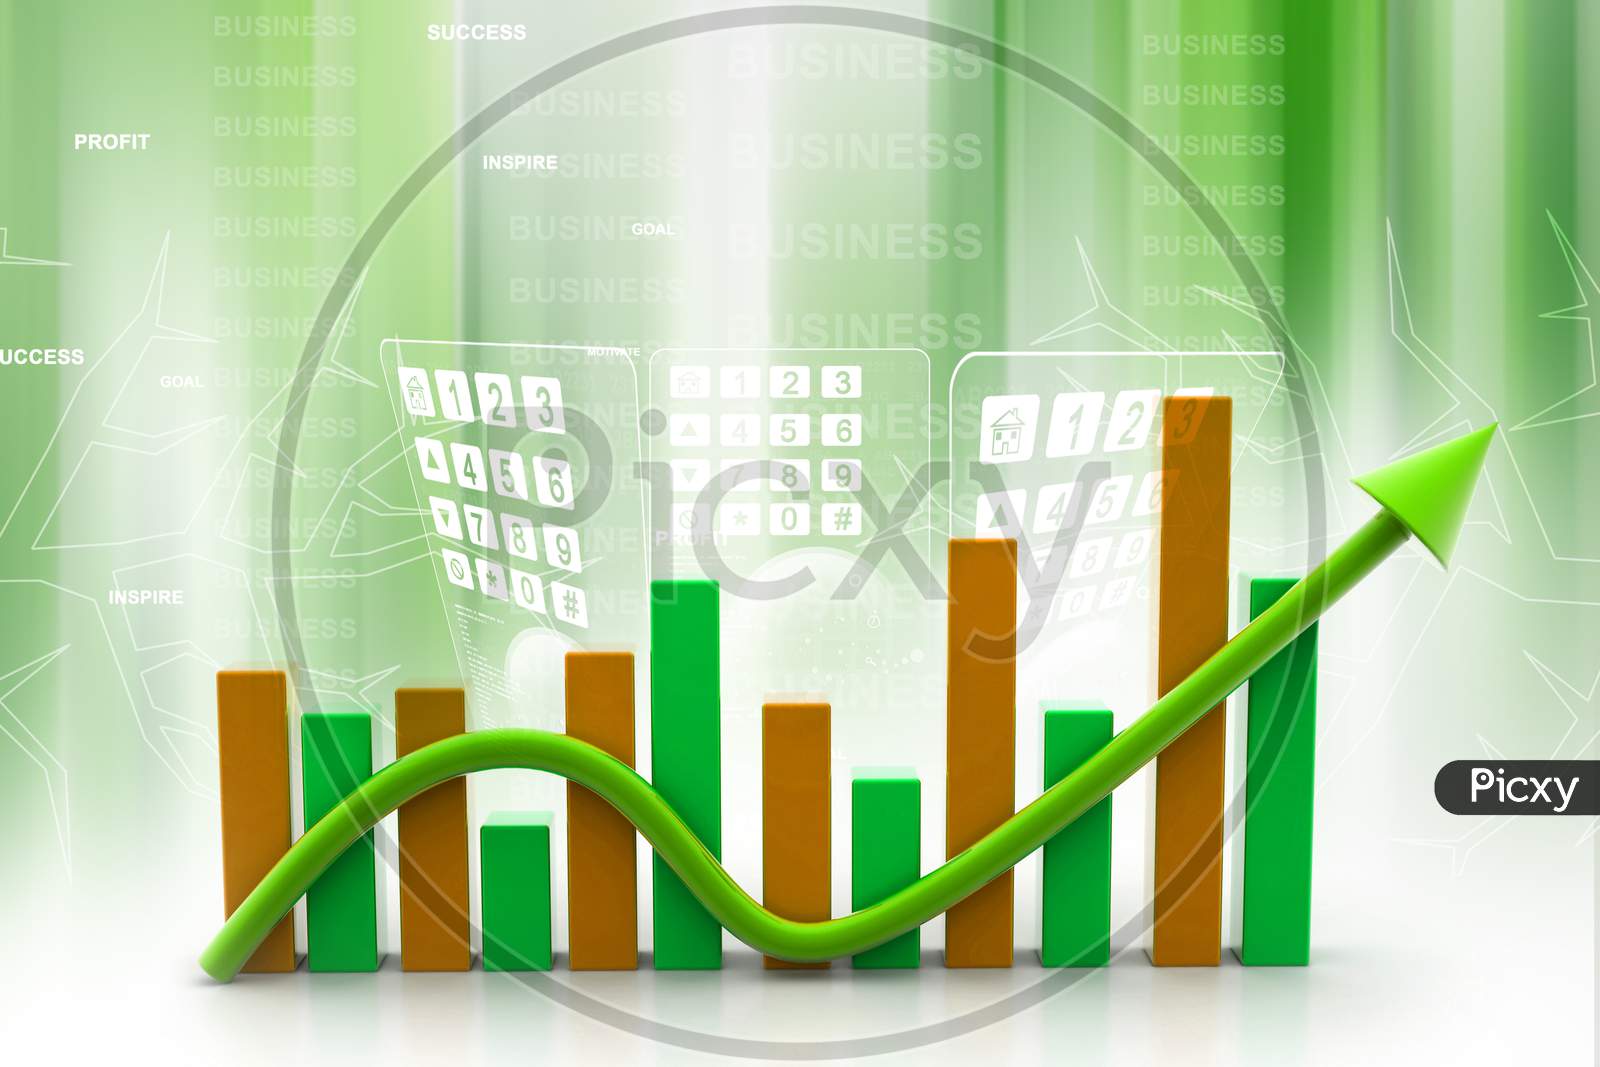 Digital Illustration Of Business Graph With Arrow Showing Growth And Profit